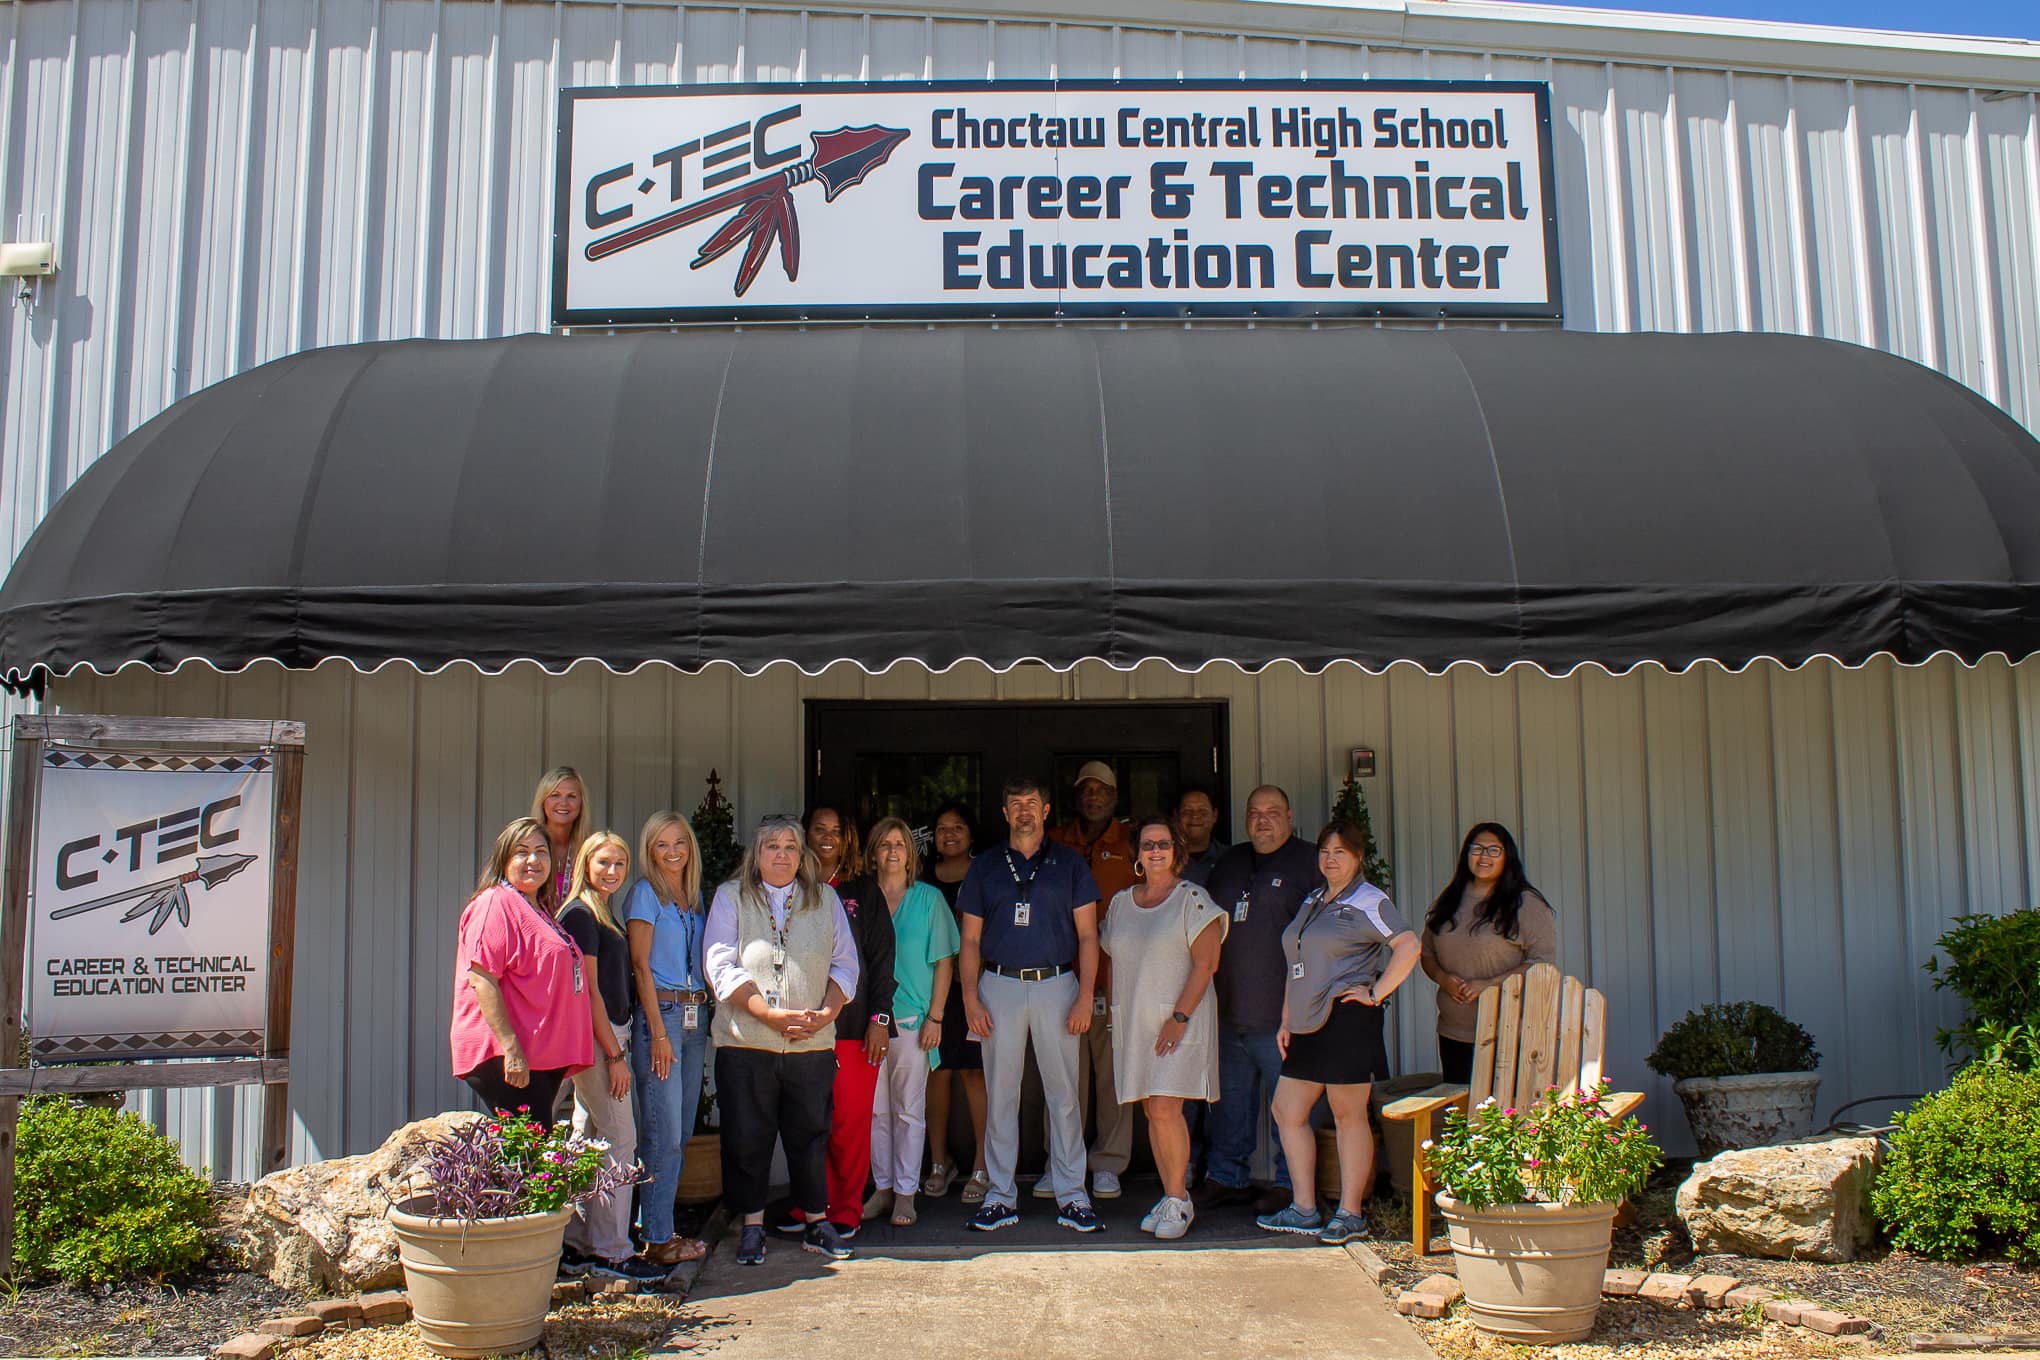 Our C-TEC Staff